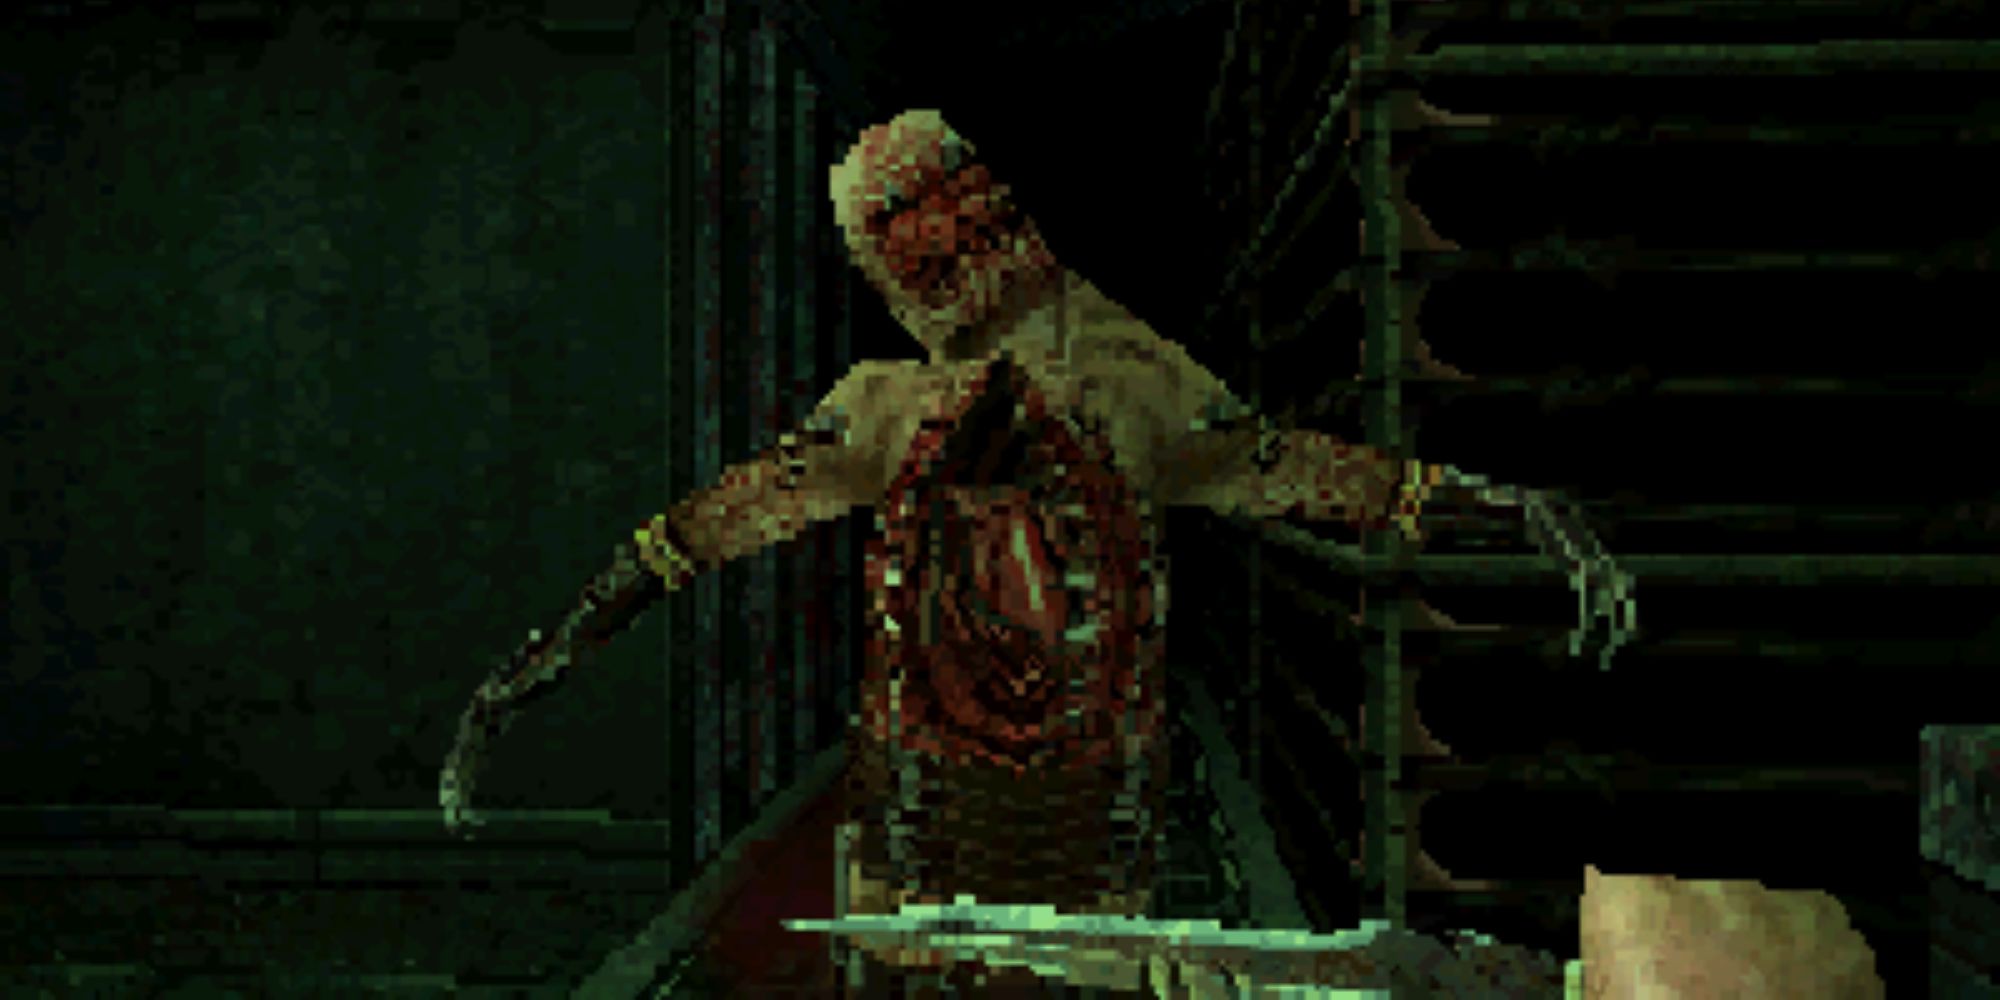 A zombie approaching a player with a knife